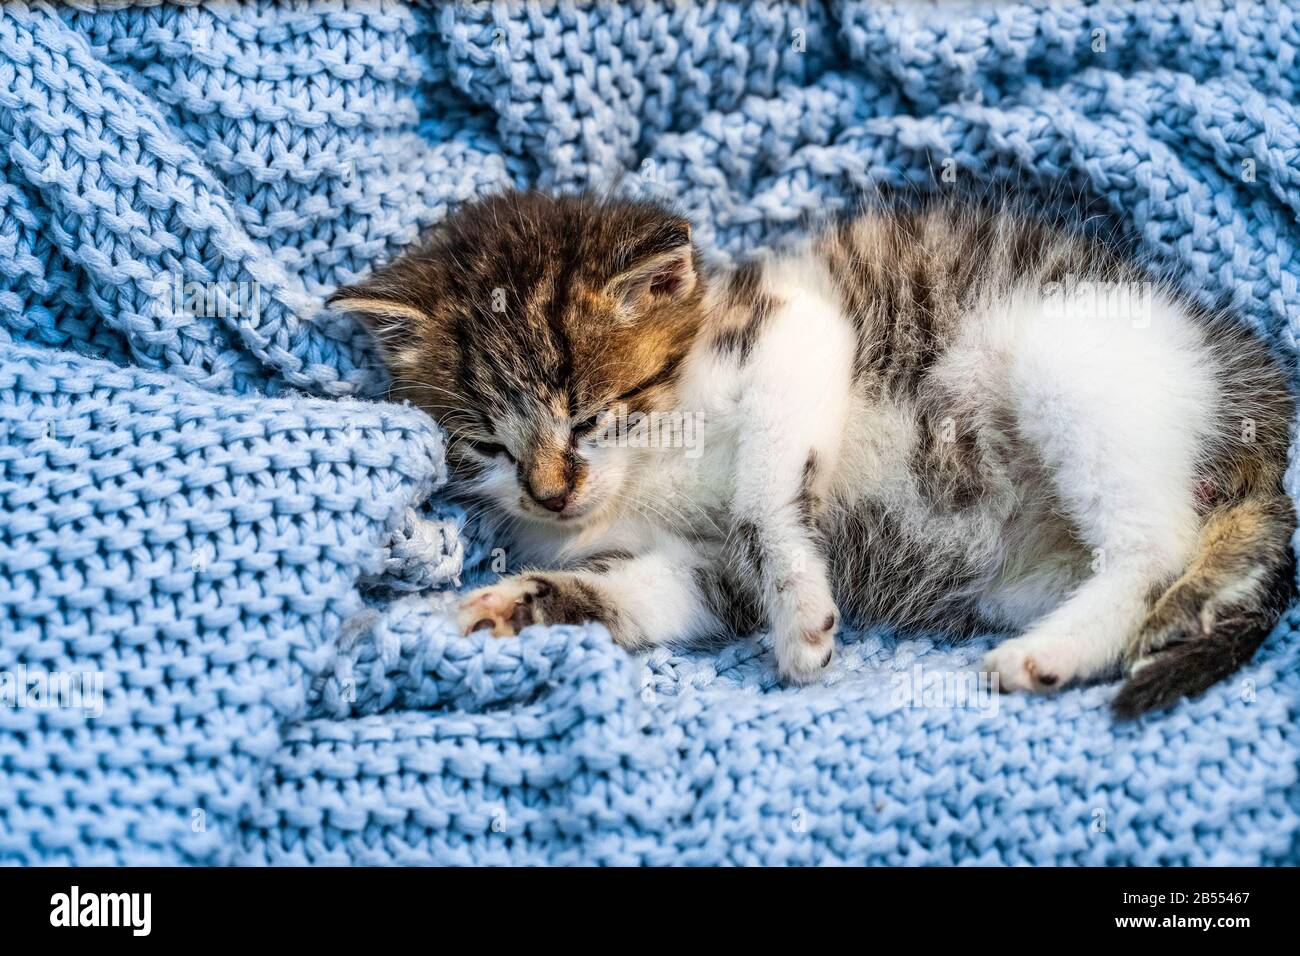 Cute tabby kitten sleeping on blue blanket, with blue eyes wide open looking at the camera. Close up Stock Photo